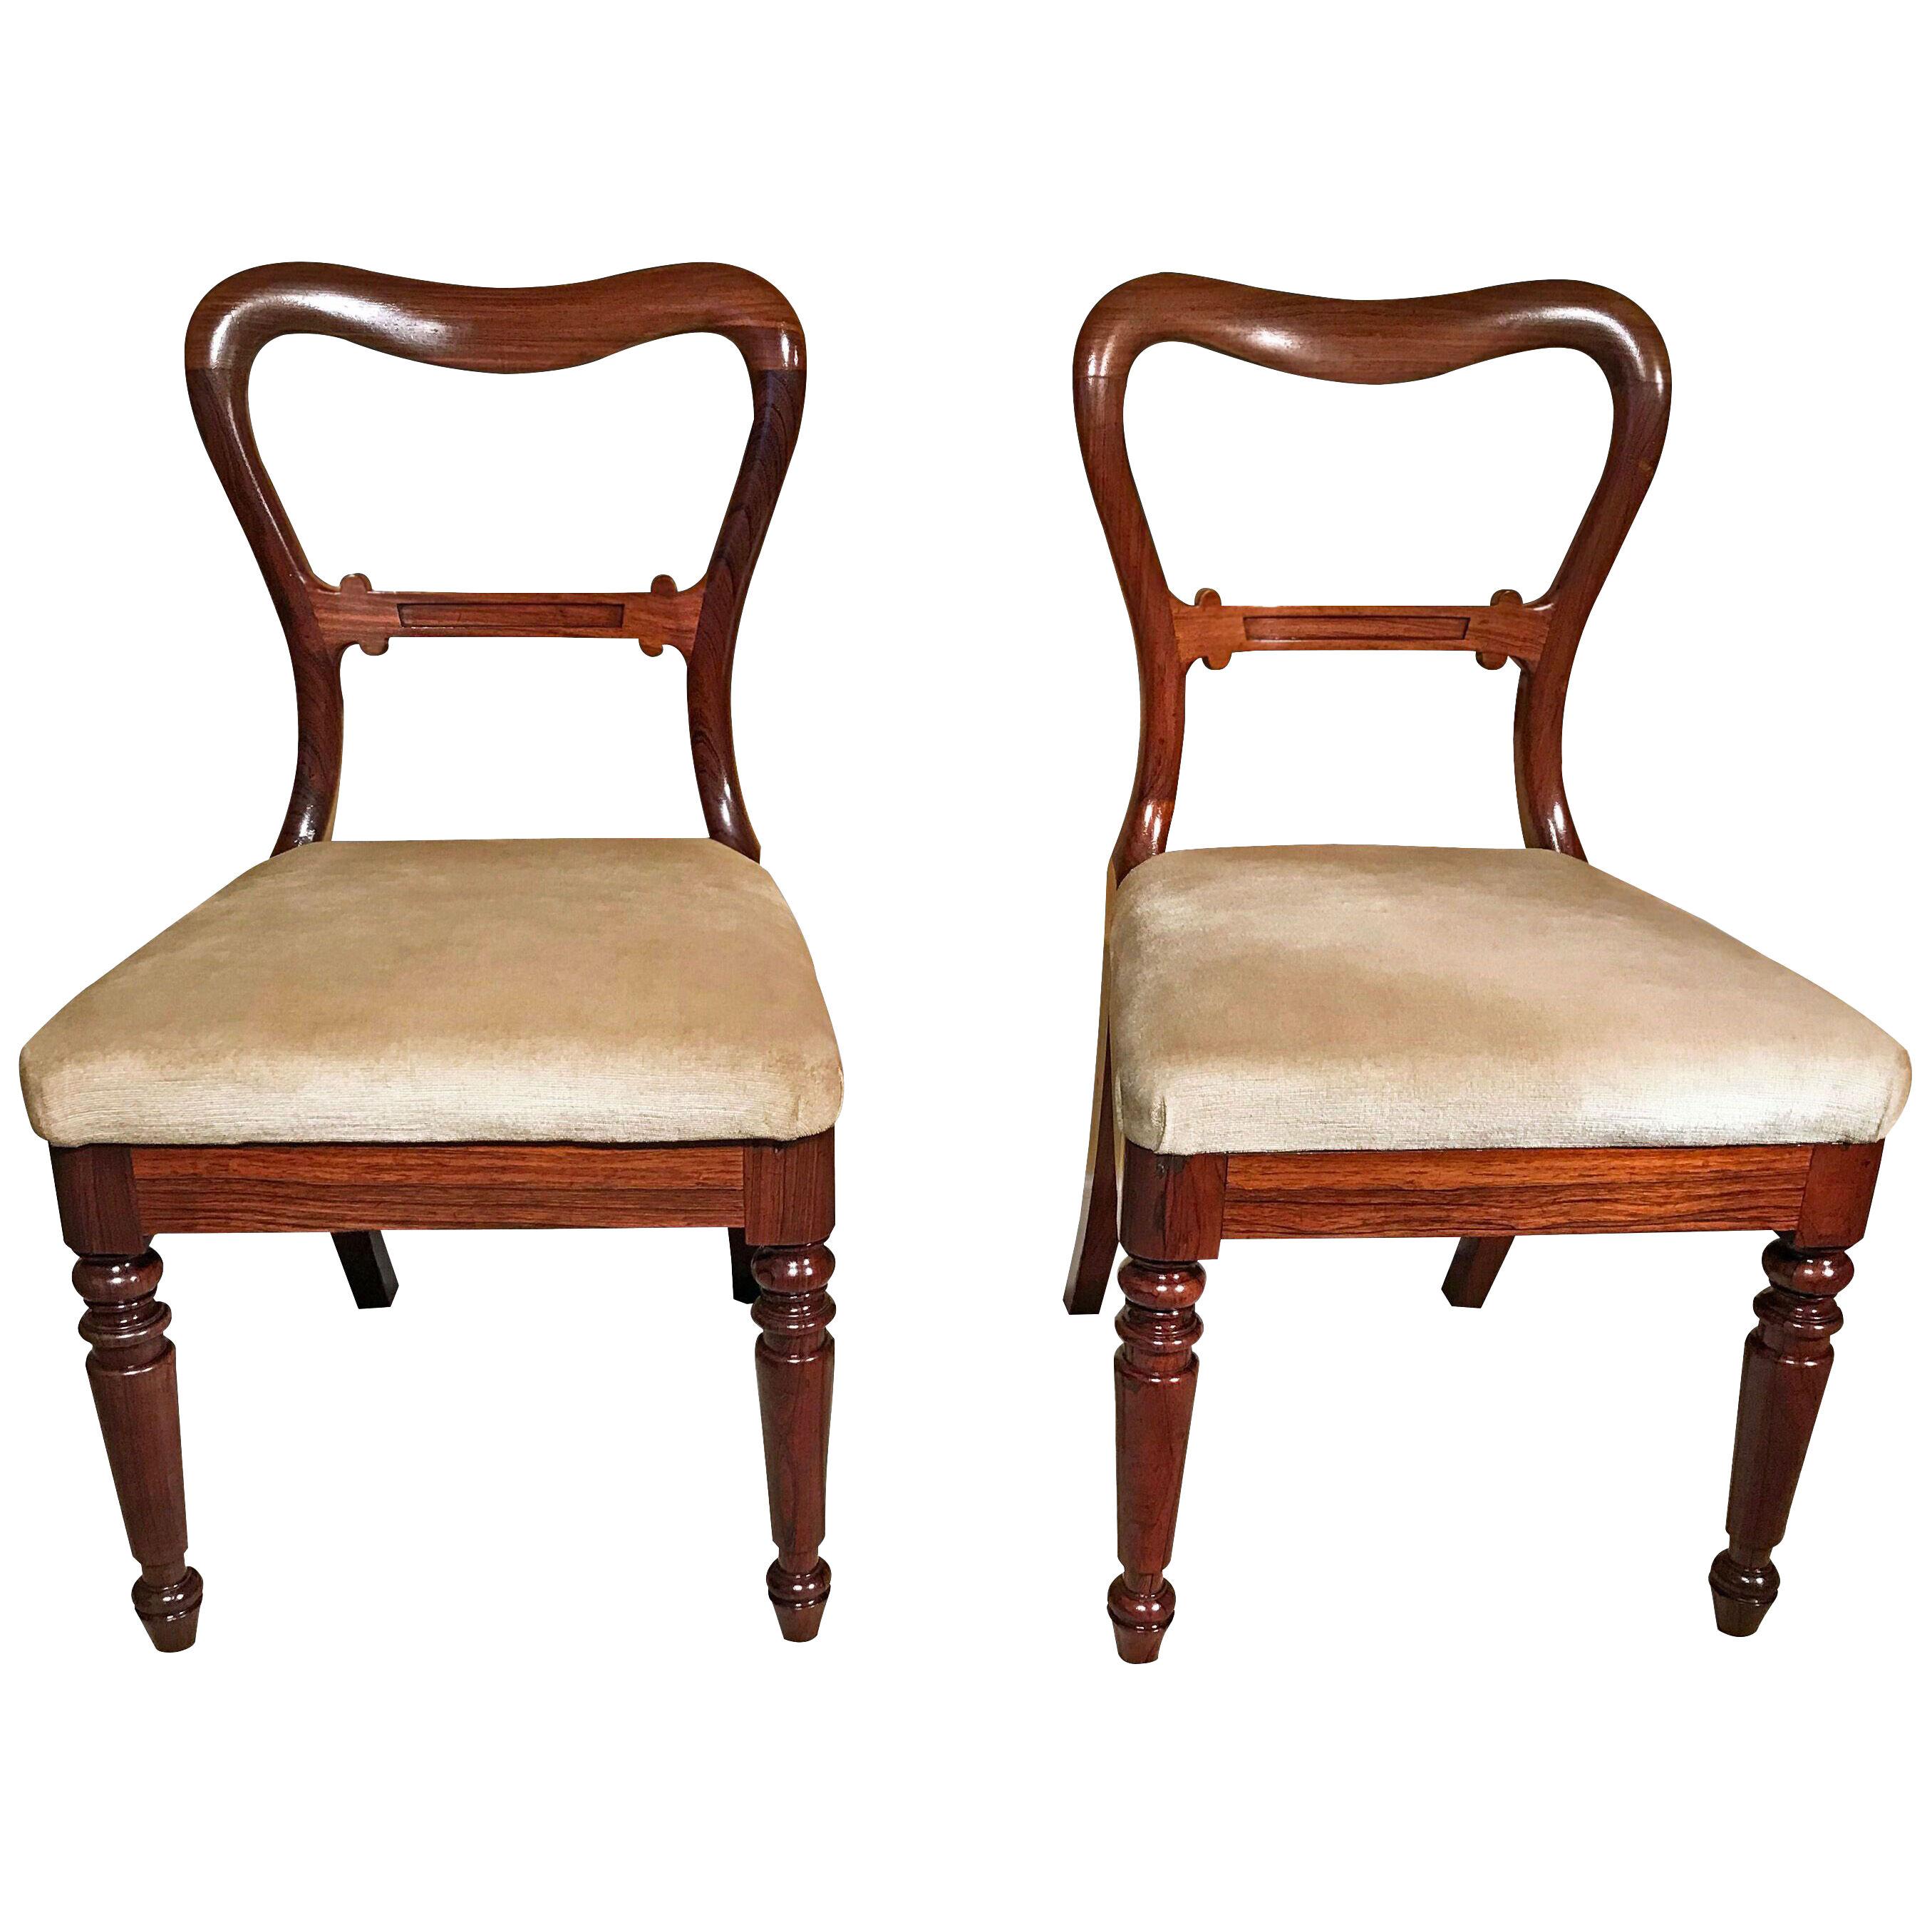 Pair of George IV Period Rosewood Chairs by Gillows of Lancaster